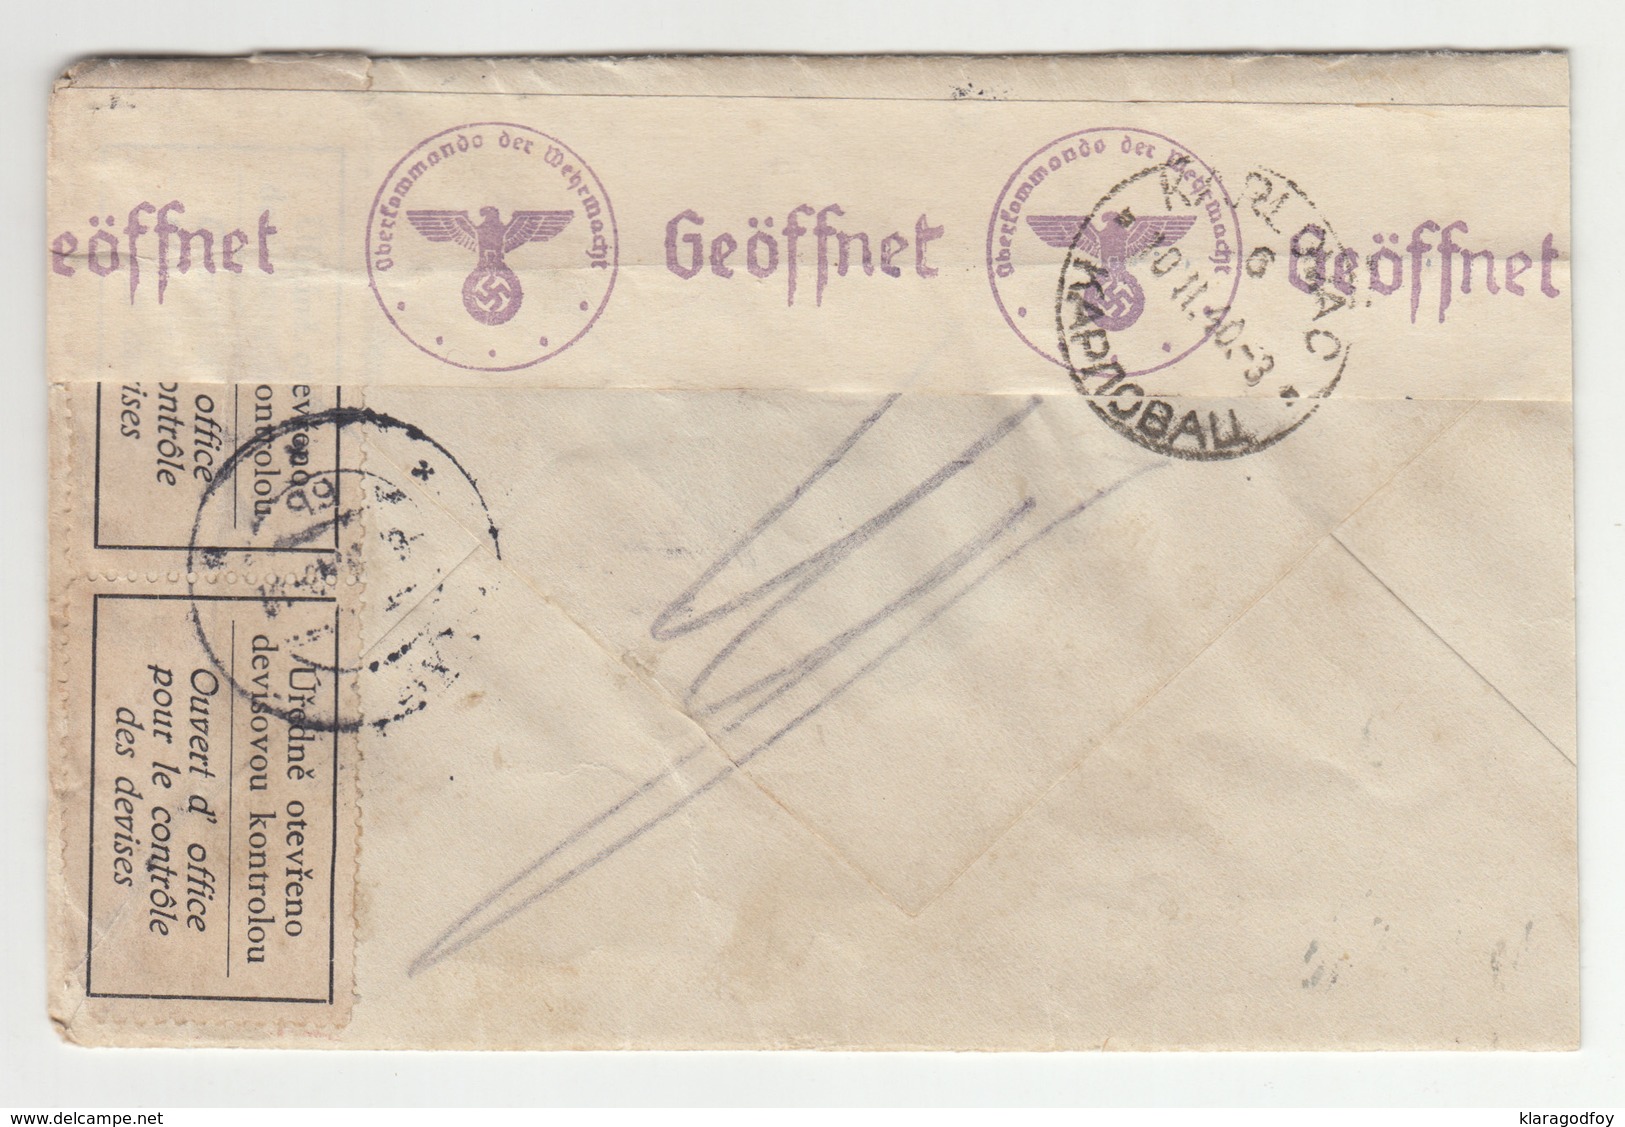 Bohemia & Moravia Letter Cover Posted 1940 To Karlovac - Censored Bb200101 - Covers & Documents